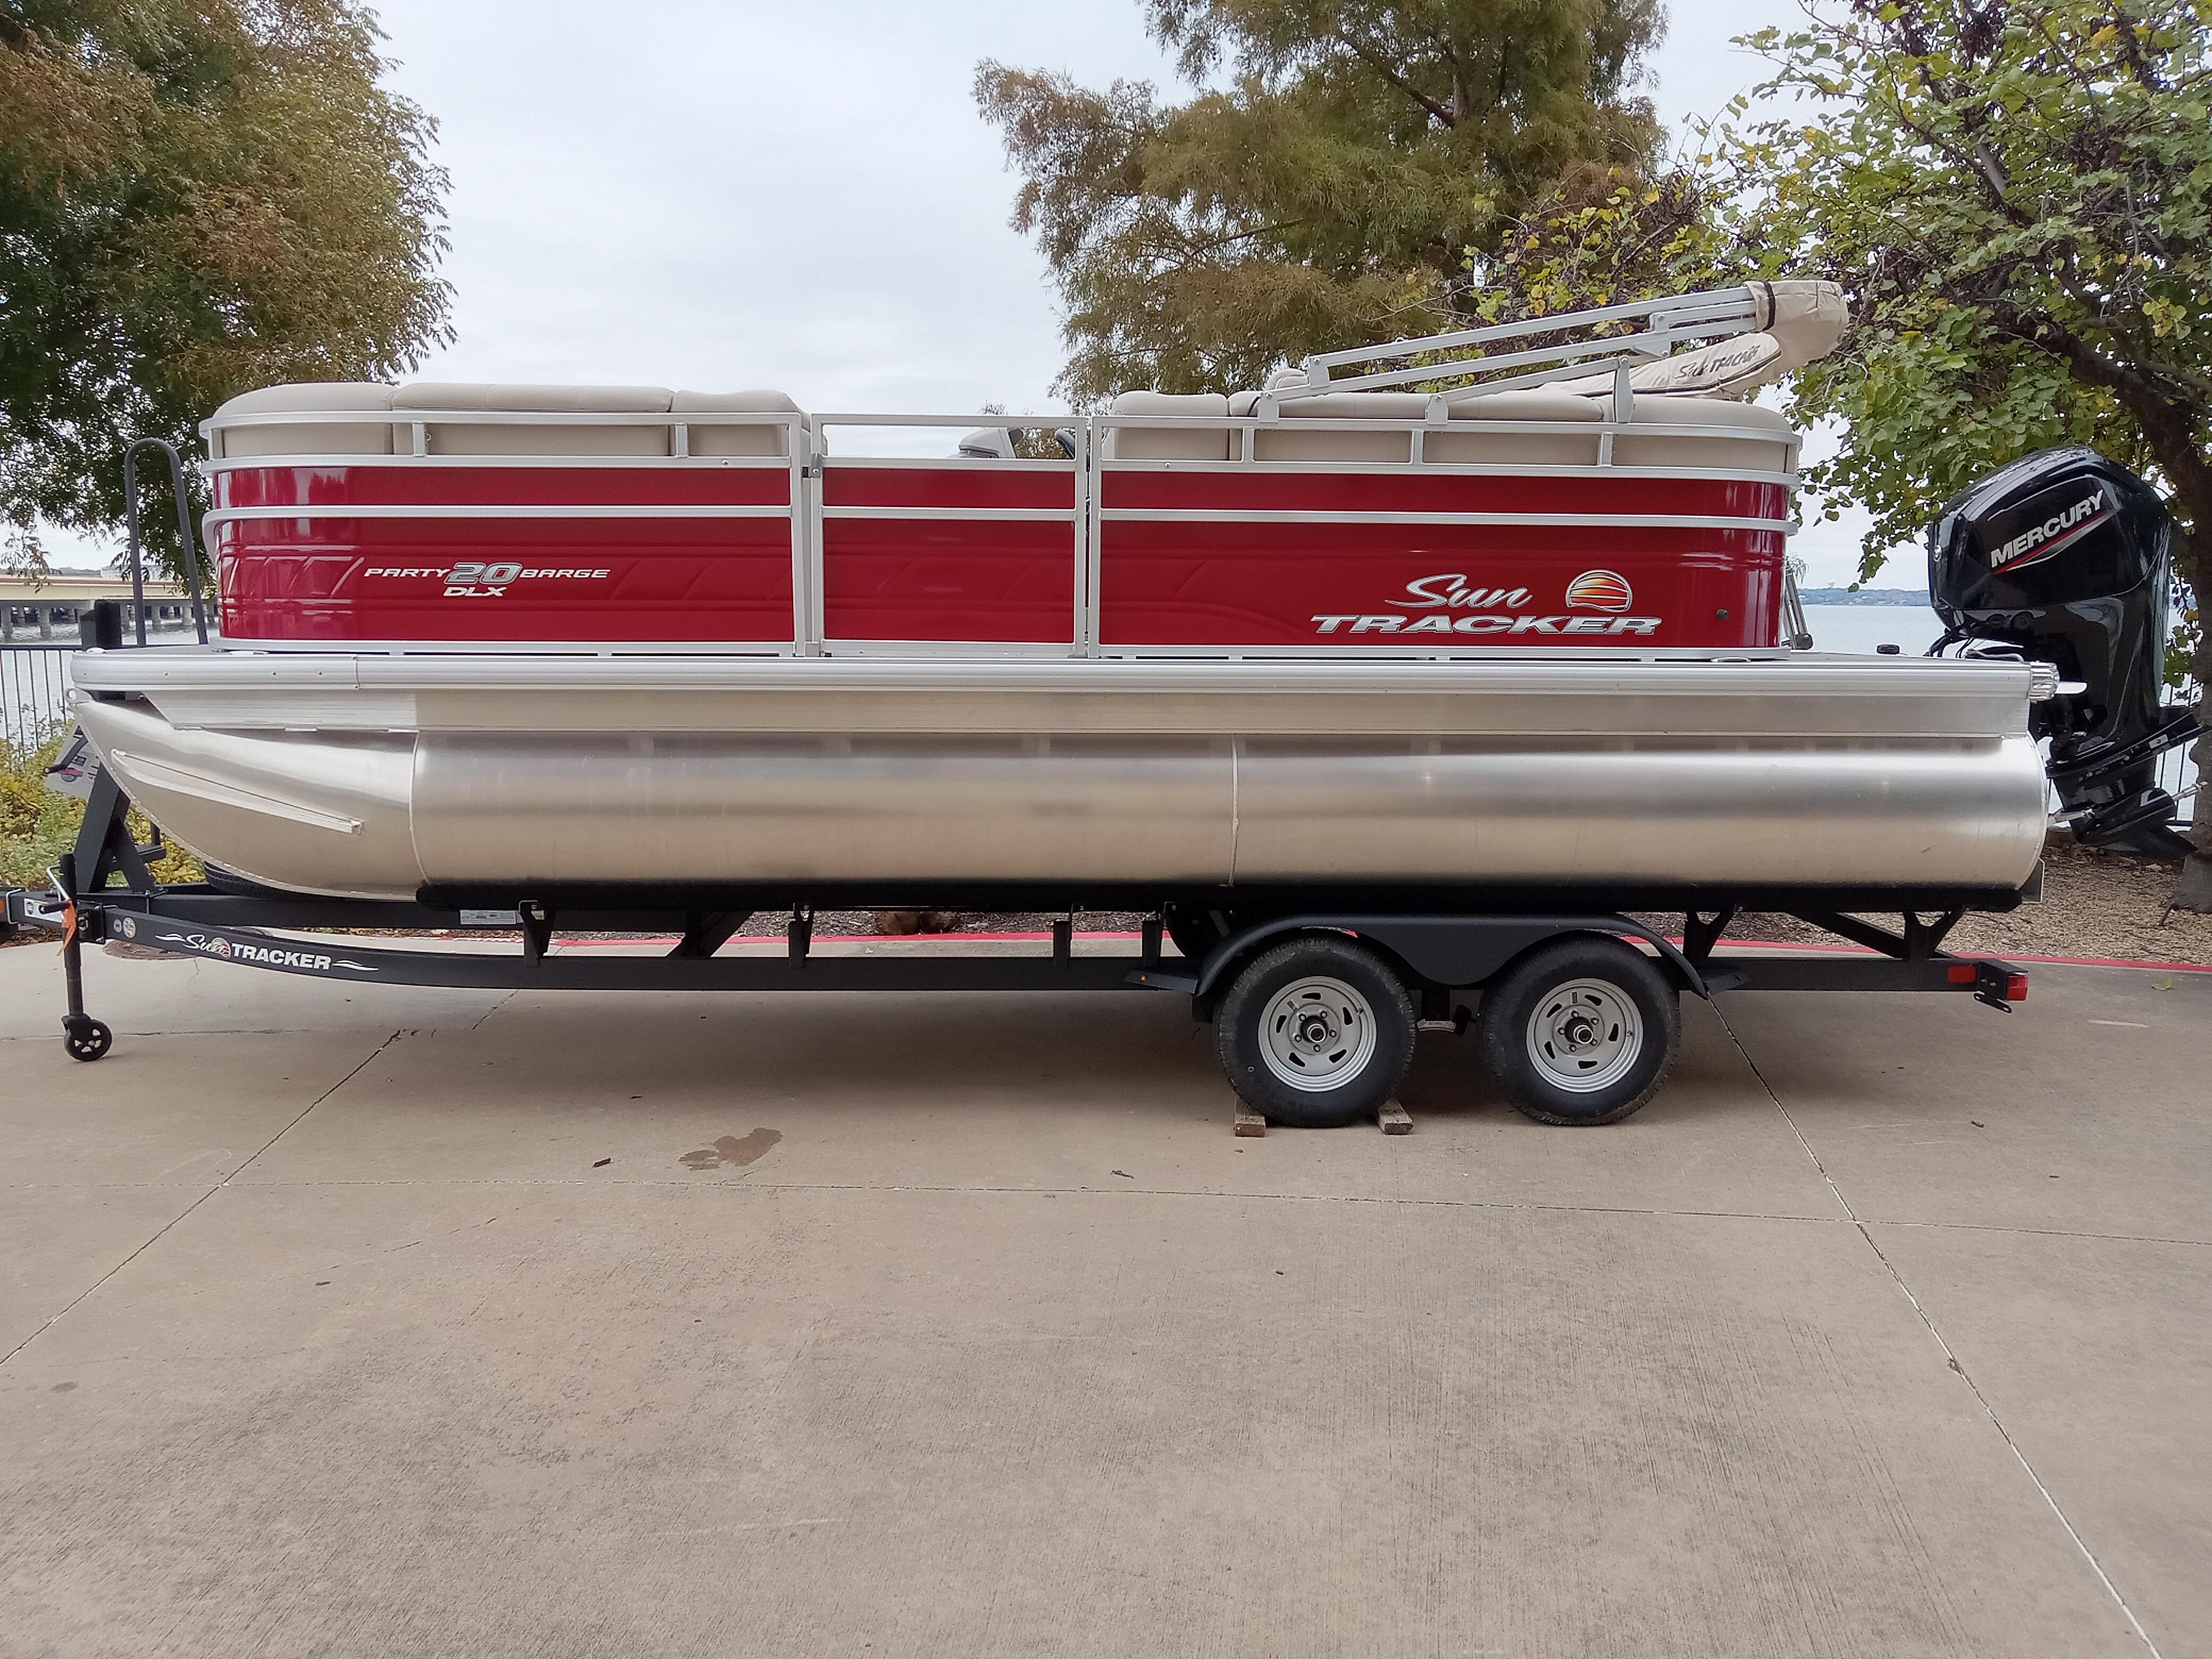 PARTY BARGE 20 DLX - SUN TRACKER Recreational Pontoon Boat